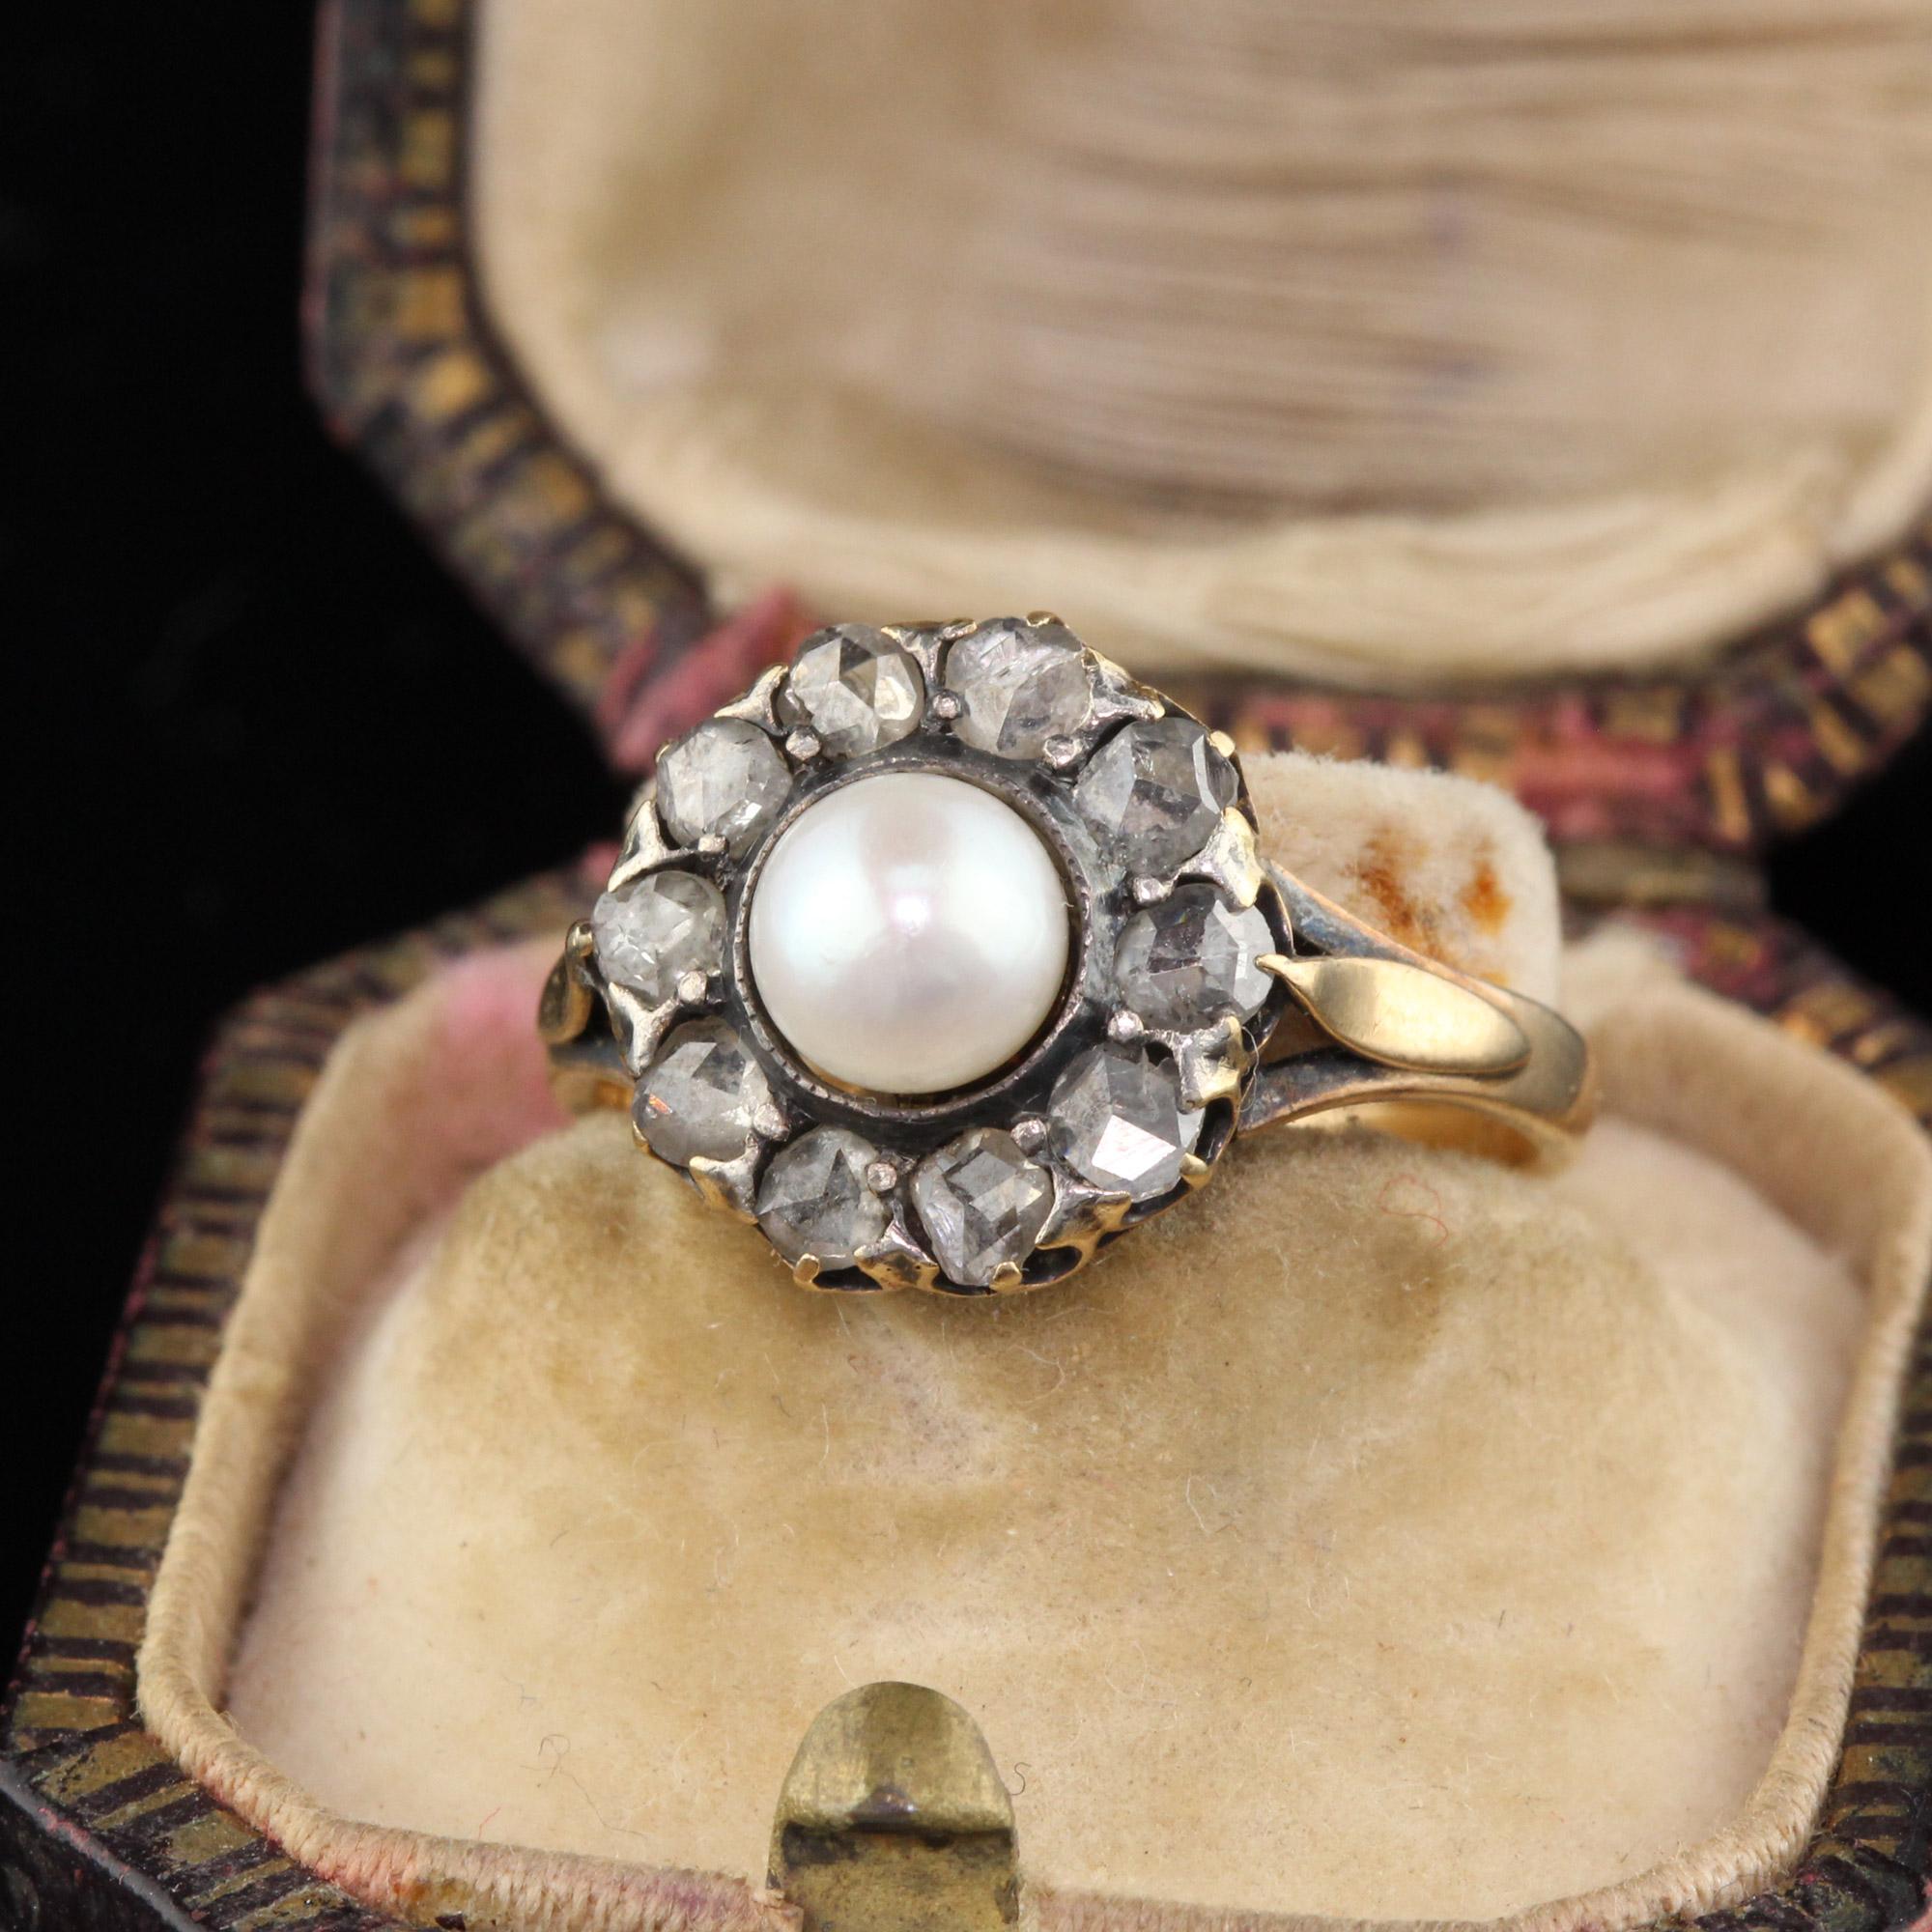 A classic Victorian cluster ring featuring a pearl in the center surrounded by a halo of rose cut diamonds.

#R0114

Metal: 18K Yellow Gold

Weight: 3.4 Grams

Total Diamond Weight: Approximately 0.50 cts

Pearl Measurements: 5.7 mm wide

Ring Size: